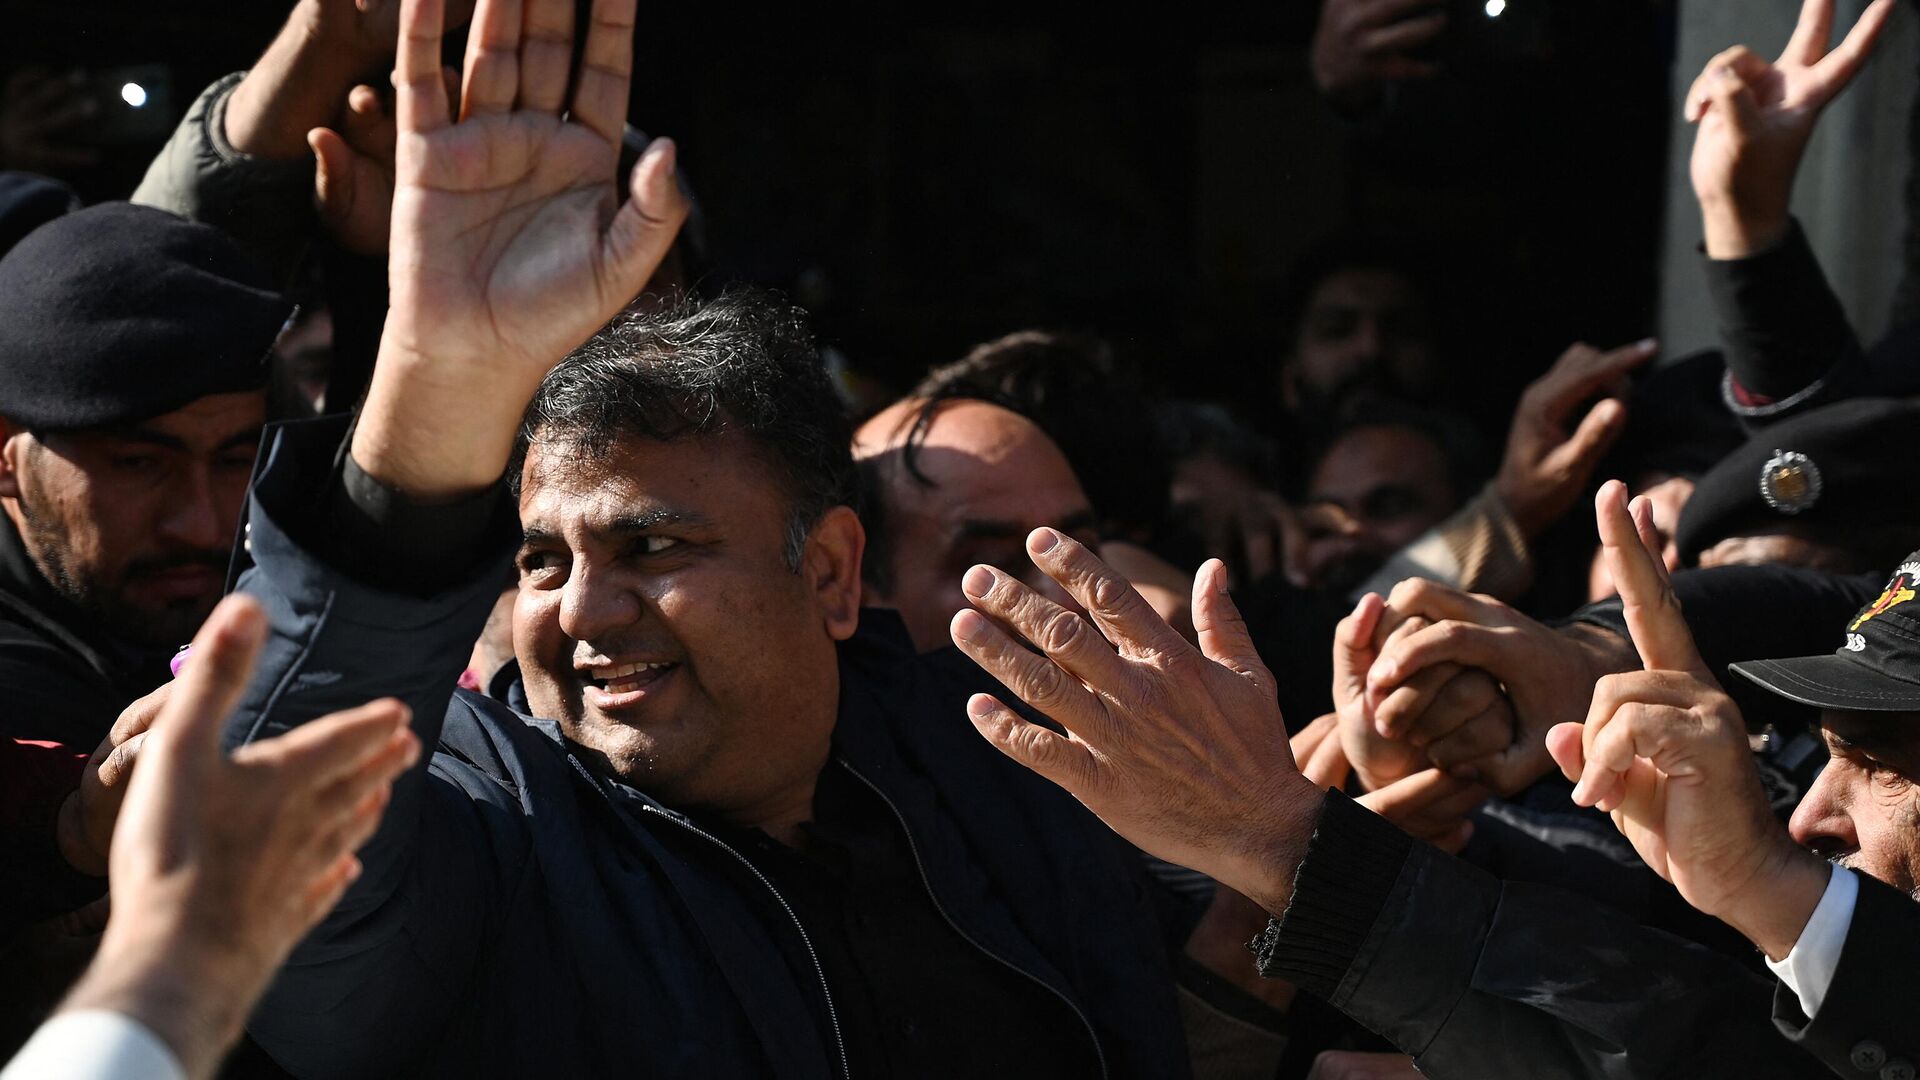 Pakistan's former information minister Fawad Chaudhry (C) gestures as police officials escort him after a hearing at a court in Islamabad on January 27, 2023. - Sputnik India, 1920, 27.01.2023